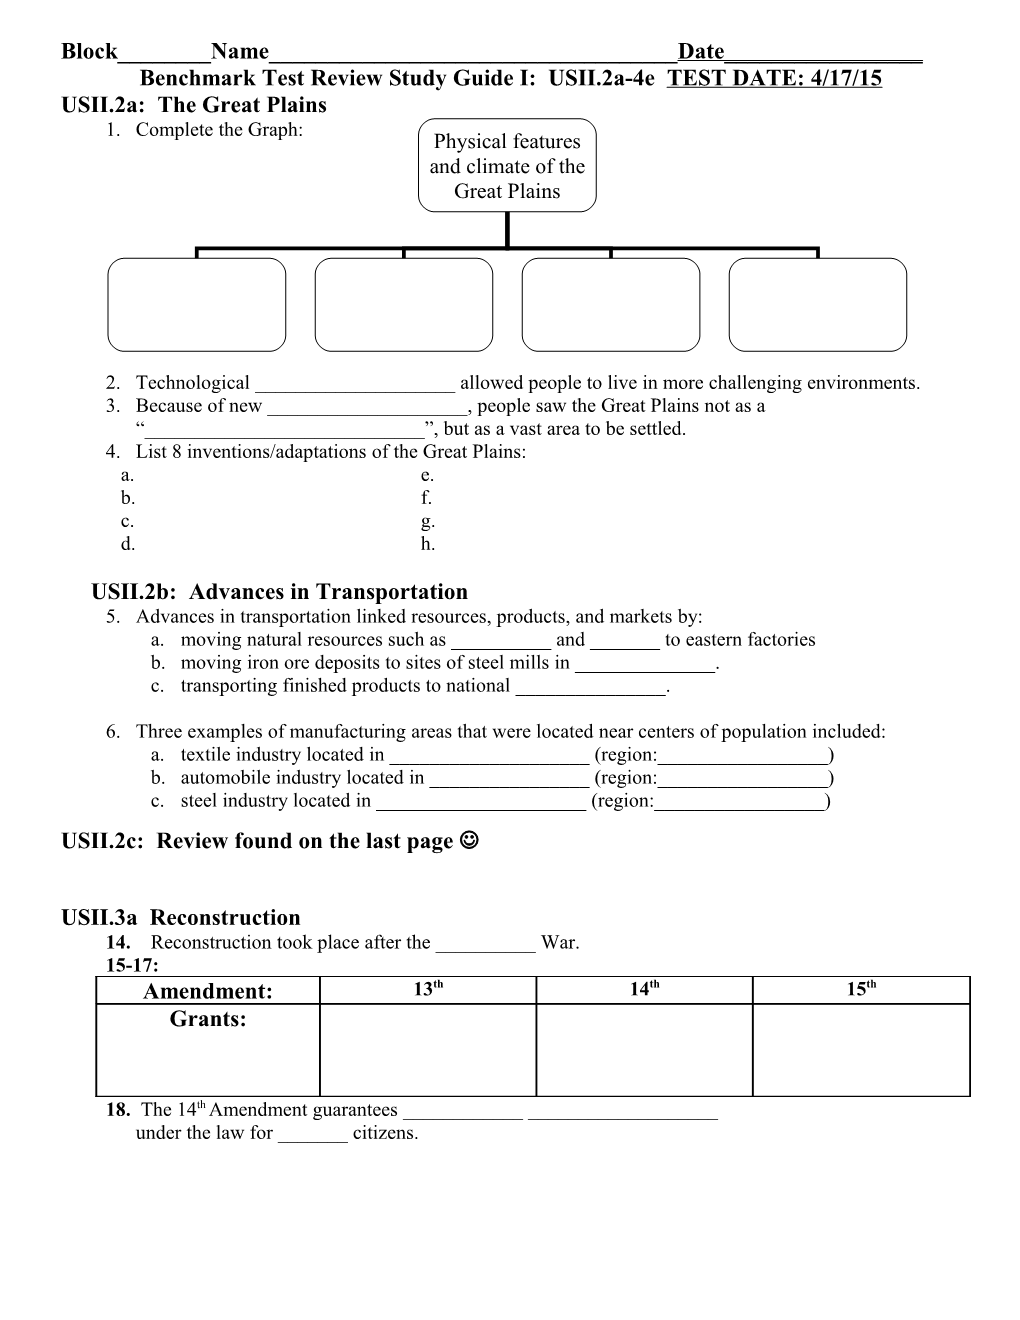 Benchmark Test Review Study Guide I: USII.2A-4E TEST DATE: 4/17/15